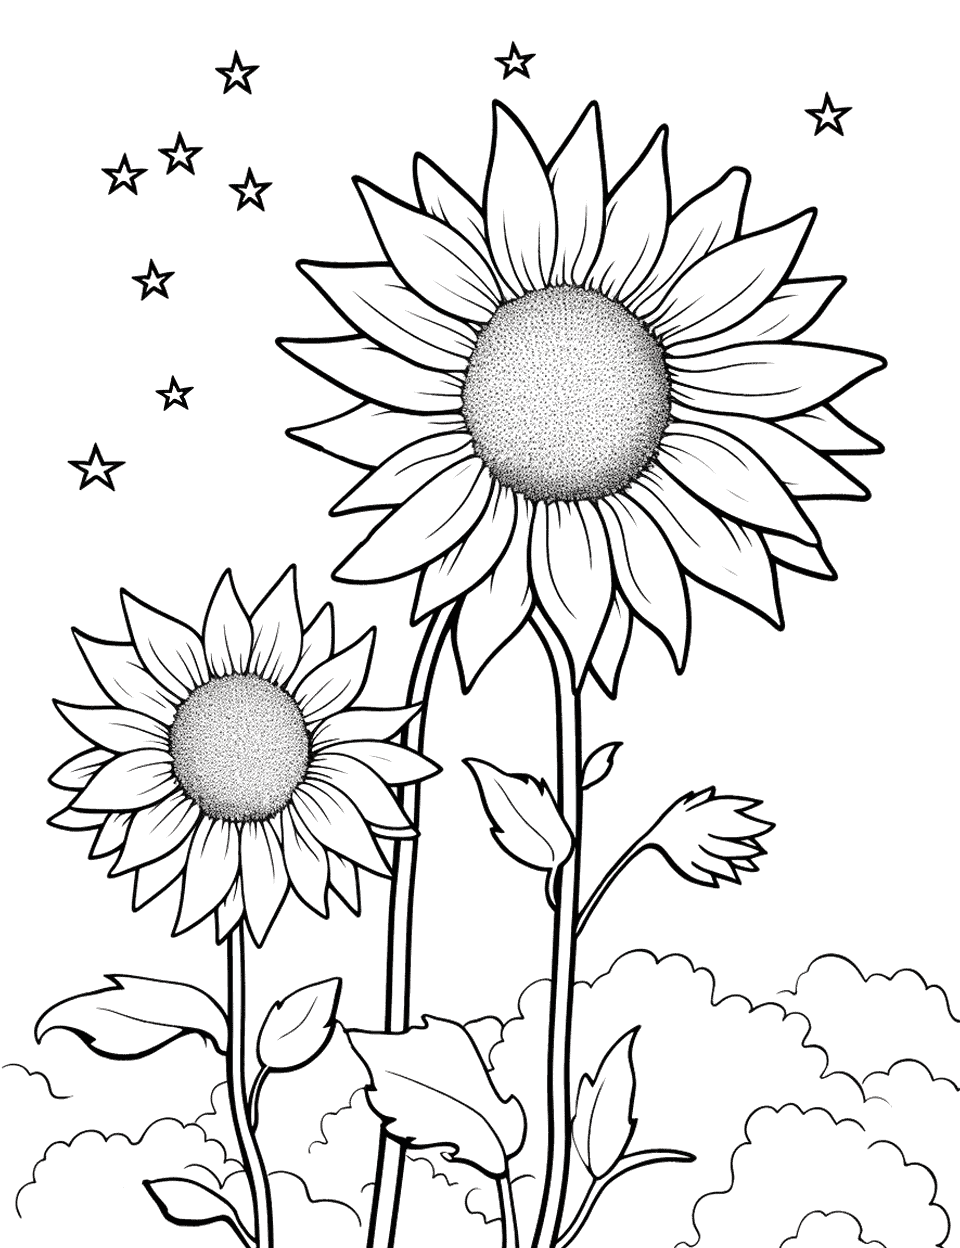 Sunflower and Stars Coloring Page - A nighttime scene with a sunflower under a starry sky.